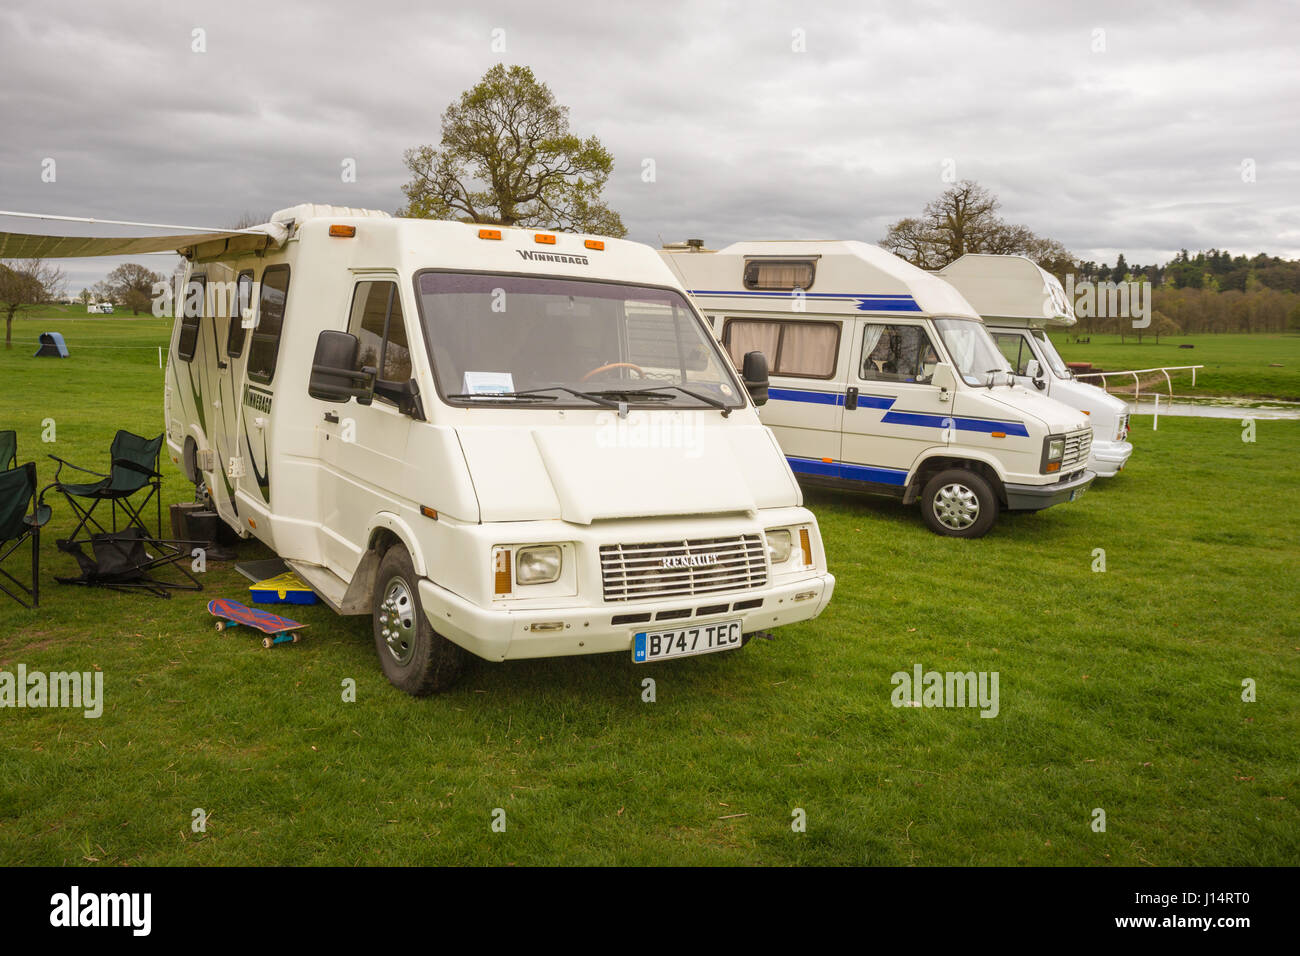 Motorhome on holiday, vintage old fashioned Stock Photo